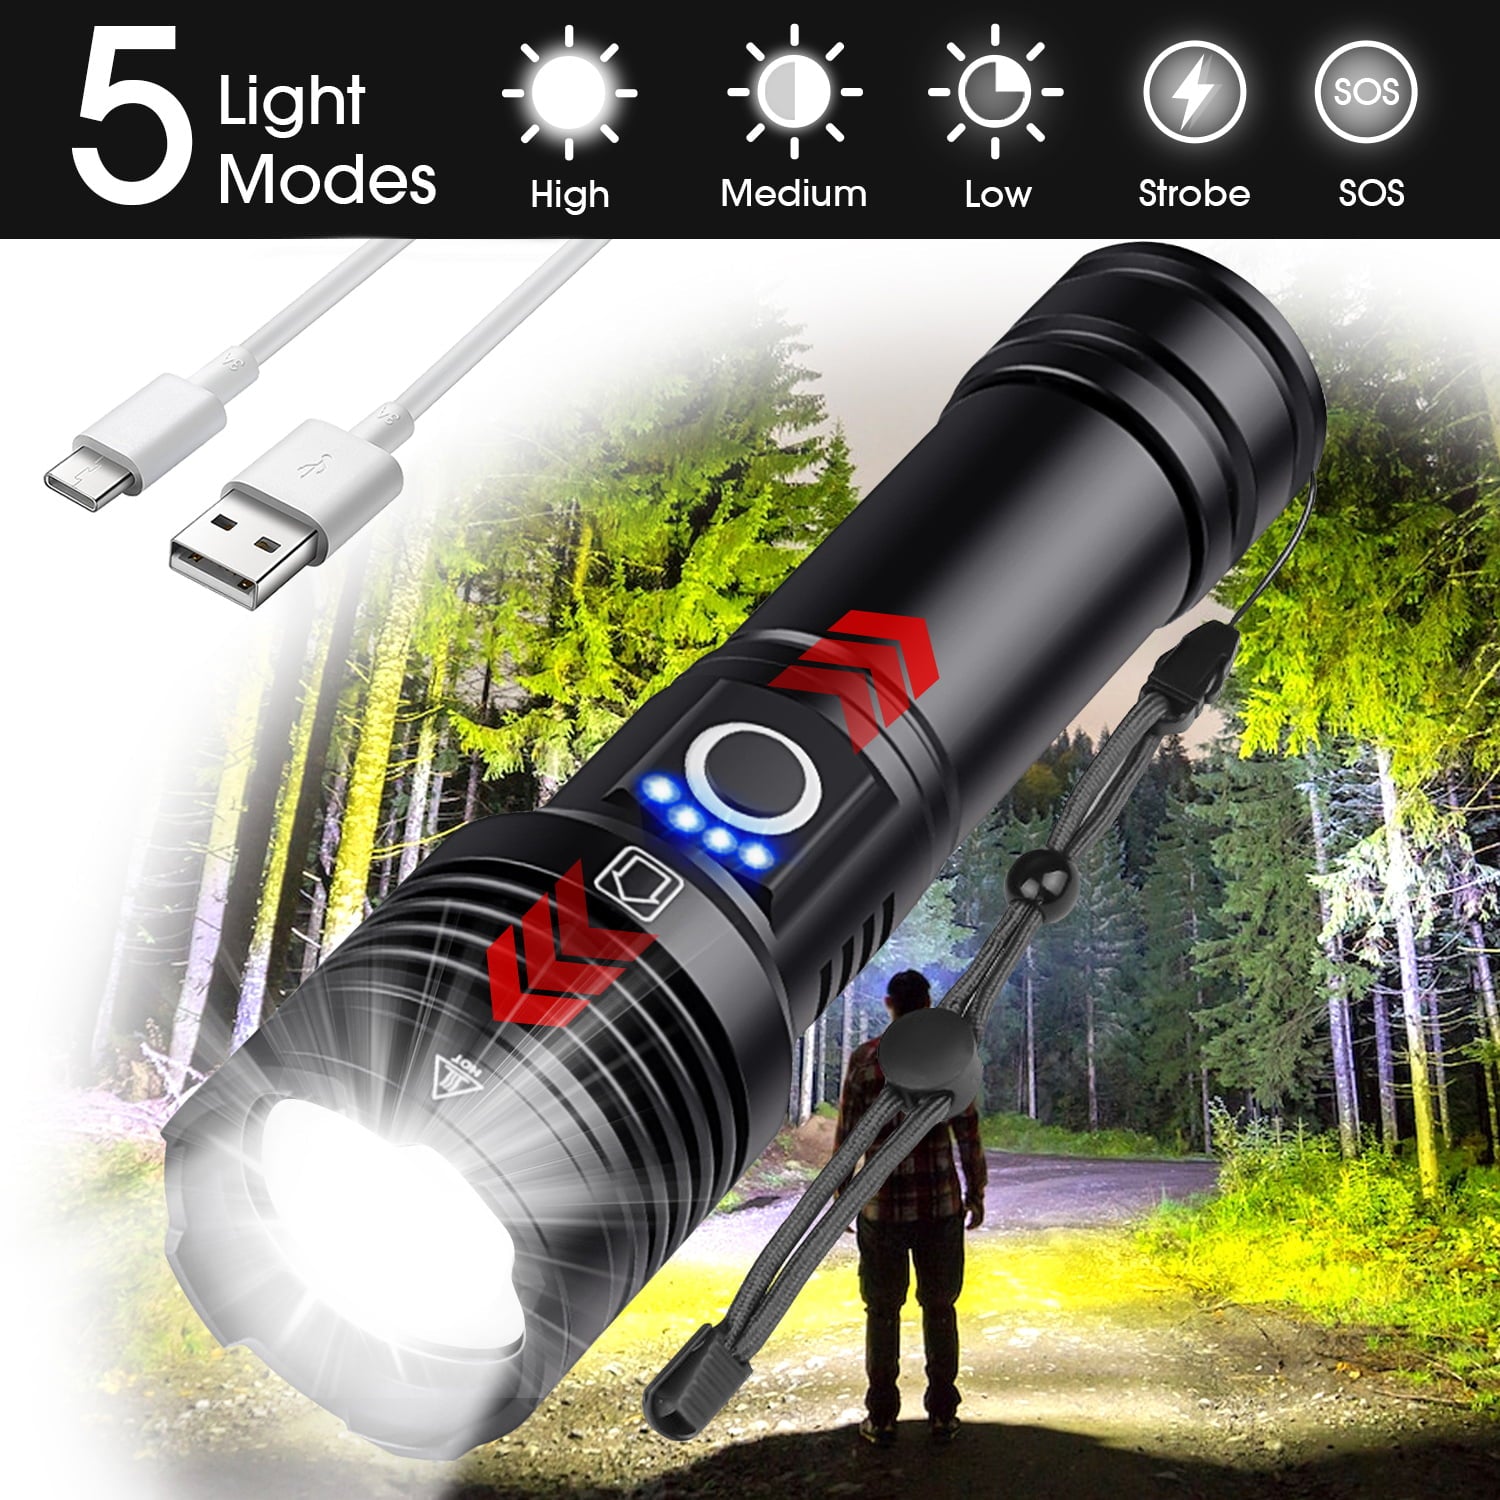 90000 Lumens Powerful Flashlight , Rechargeable Waterproof Searchlight, USB Zoom Torch Super Bright Tactical LED Flashlight for Emergencies, Camping, Hiking Hunting